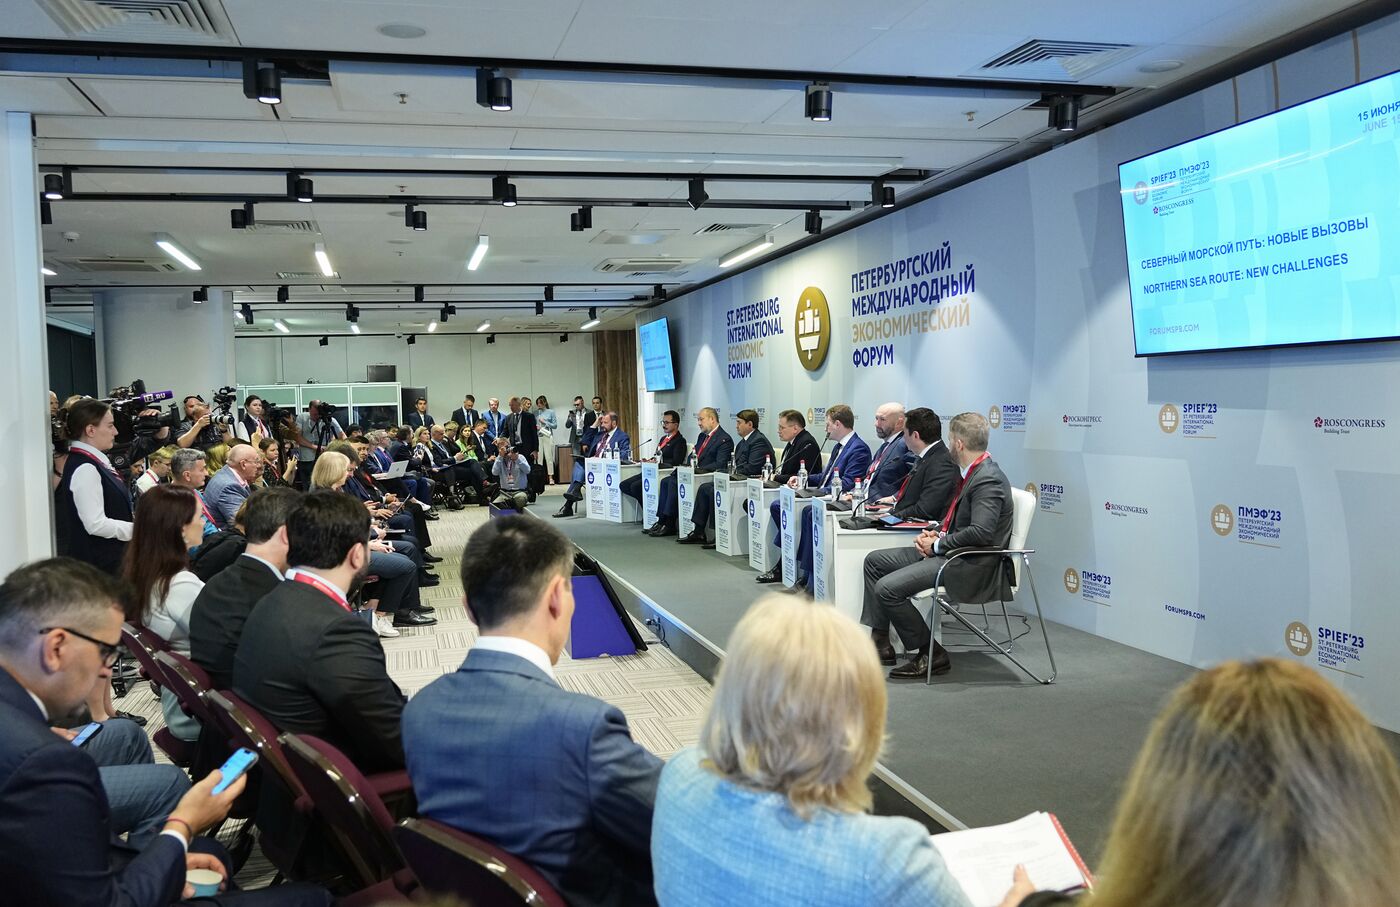 SPIEF-2023. Northern Sea Route: New Challenges